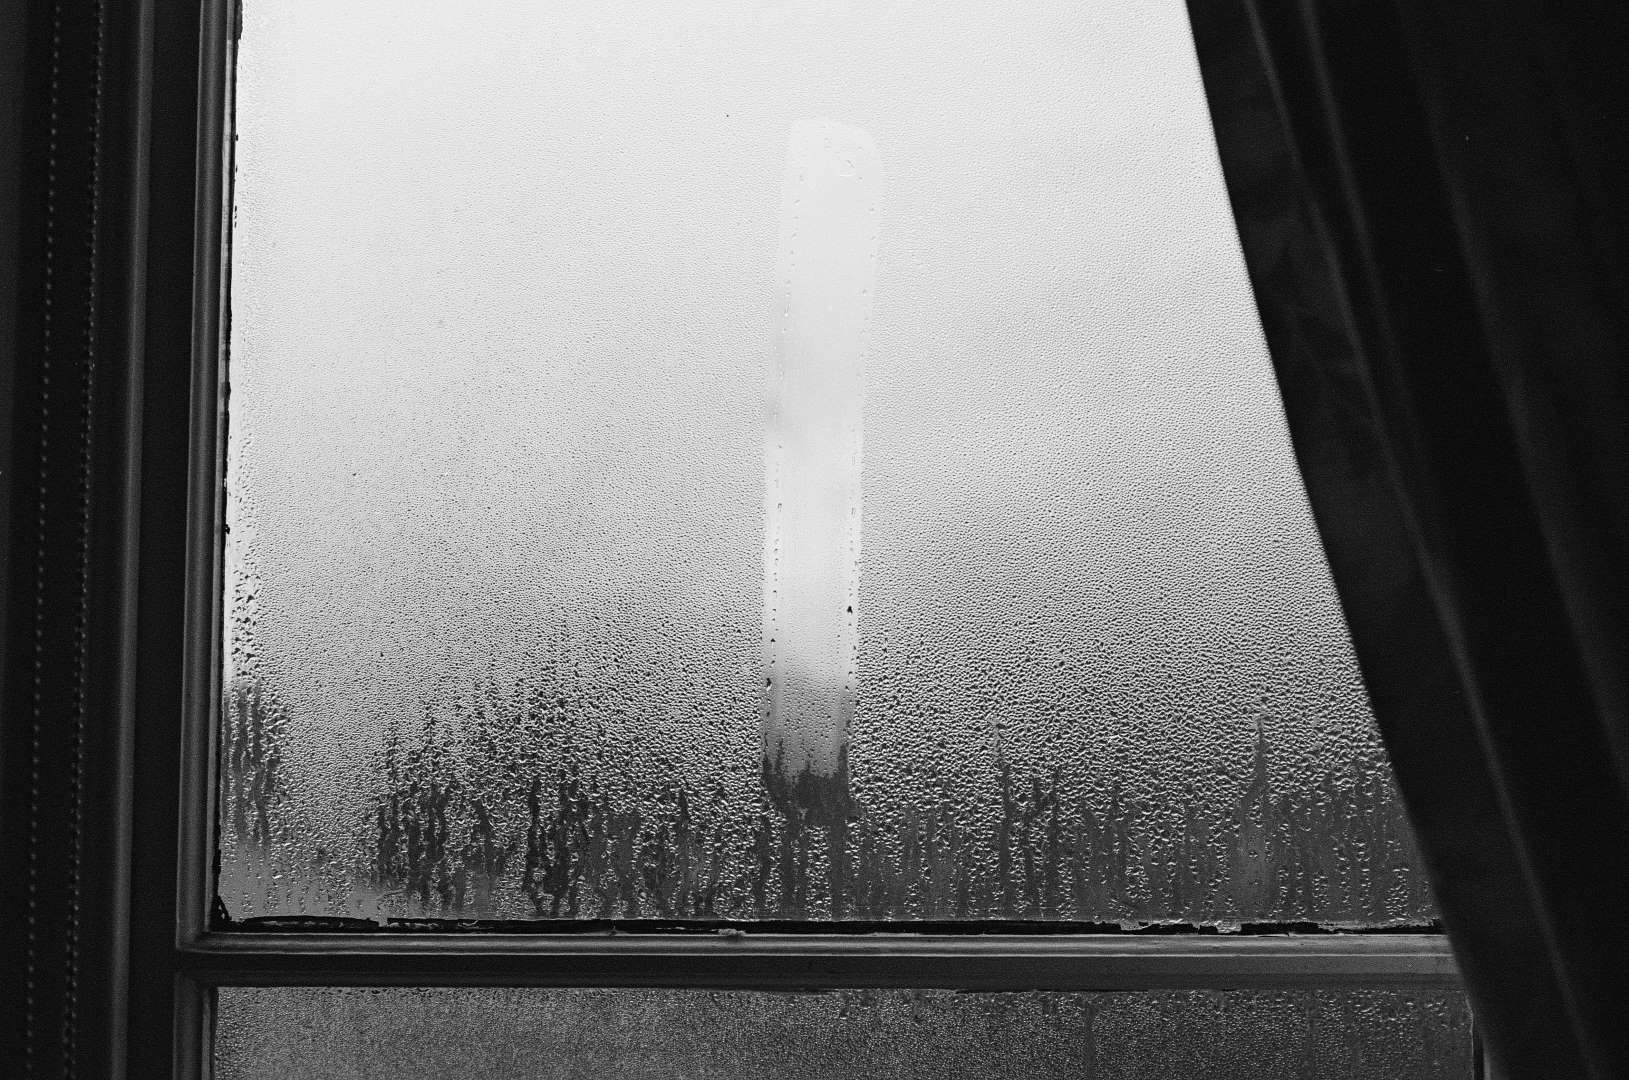 A black & white photograph of a foggy window with the letter I drawn on it